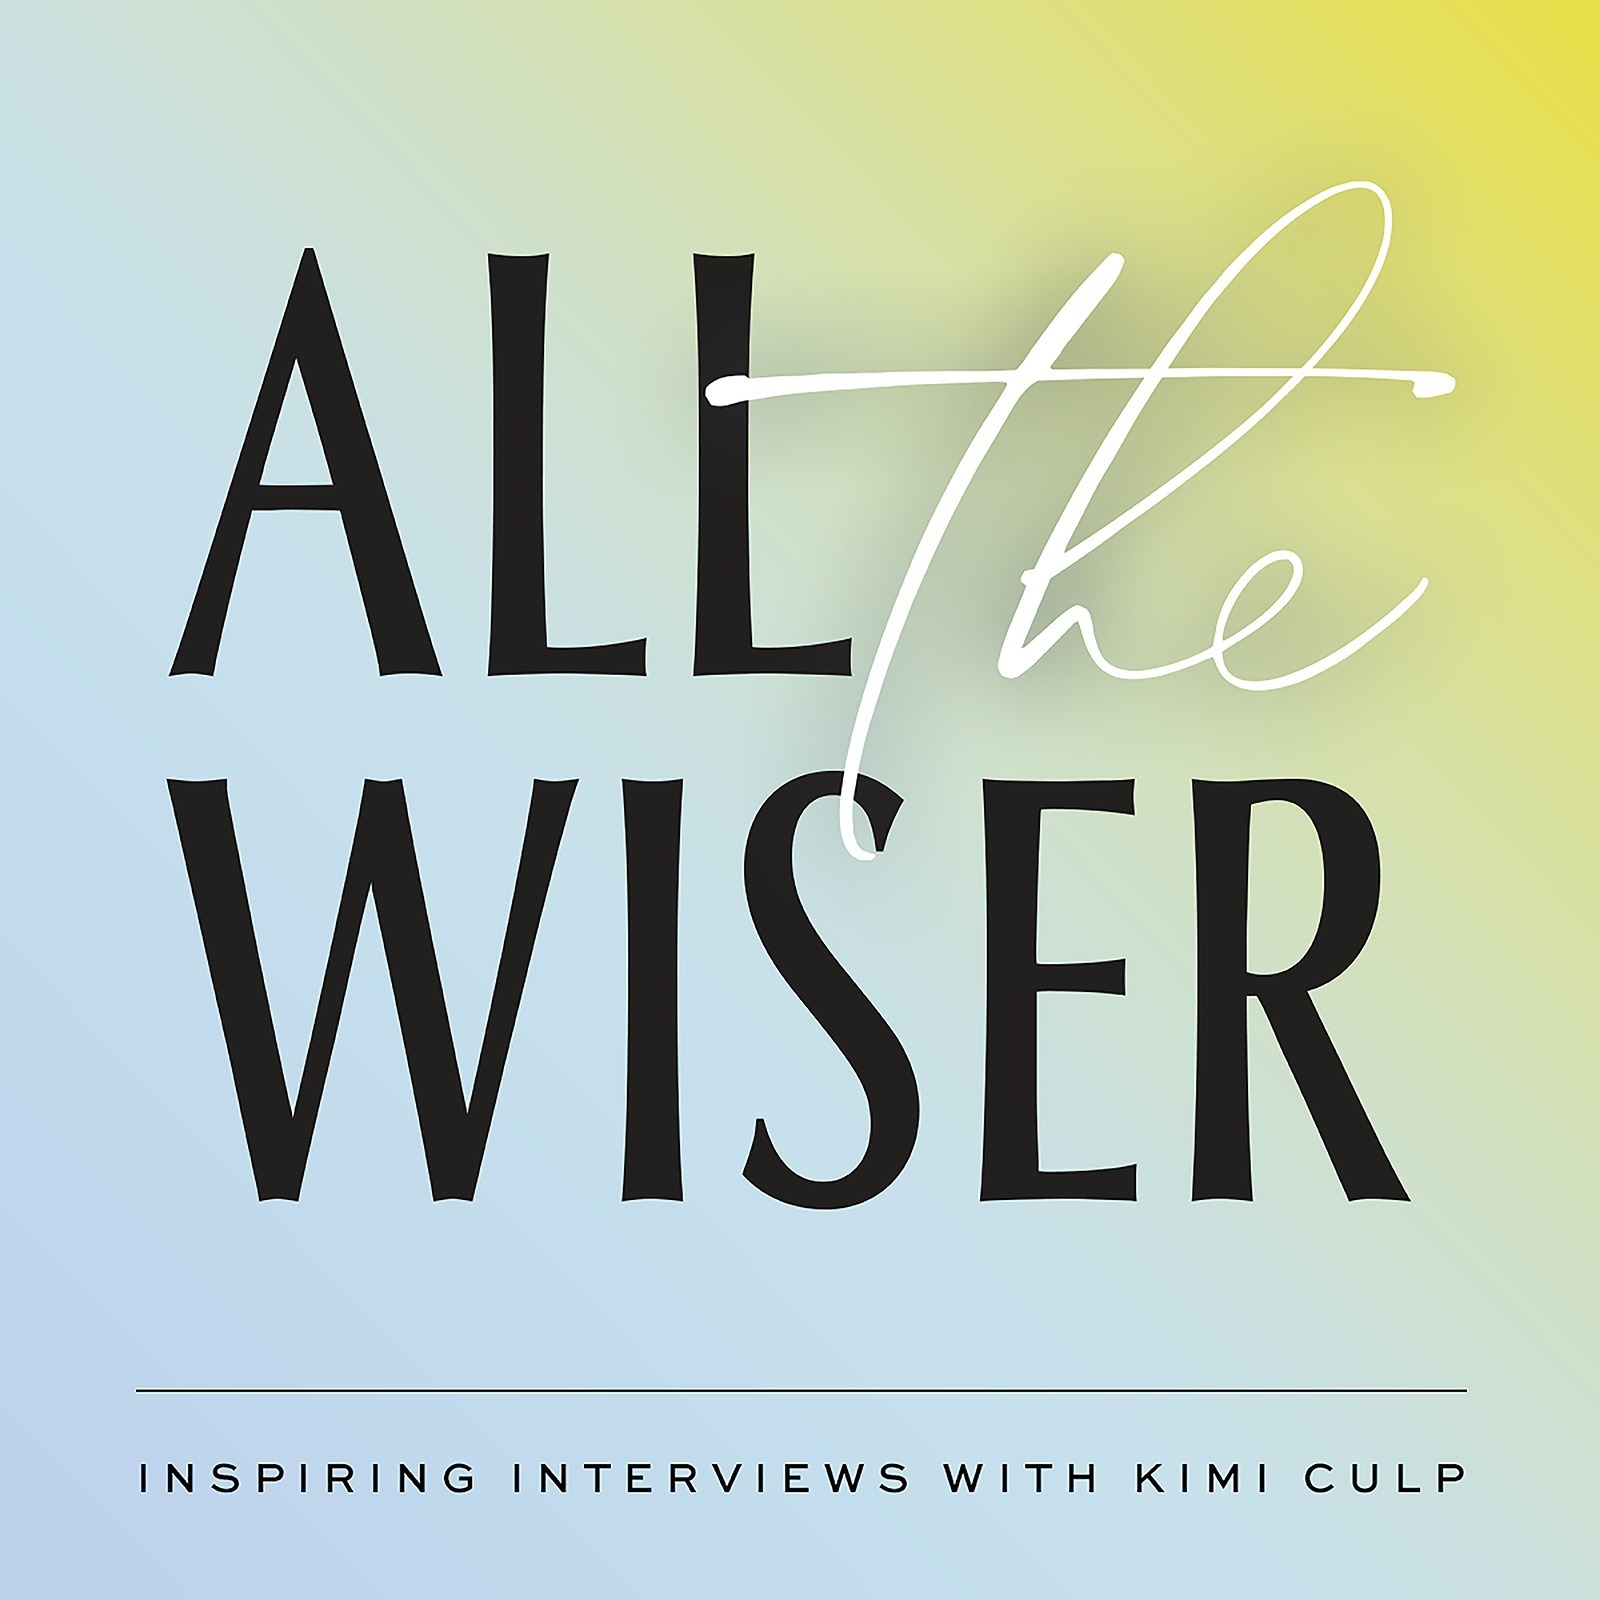 A Little Wiser: Are Goals Your Friend Or Foe?